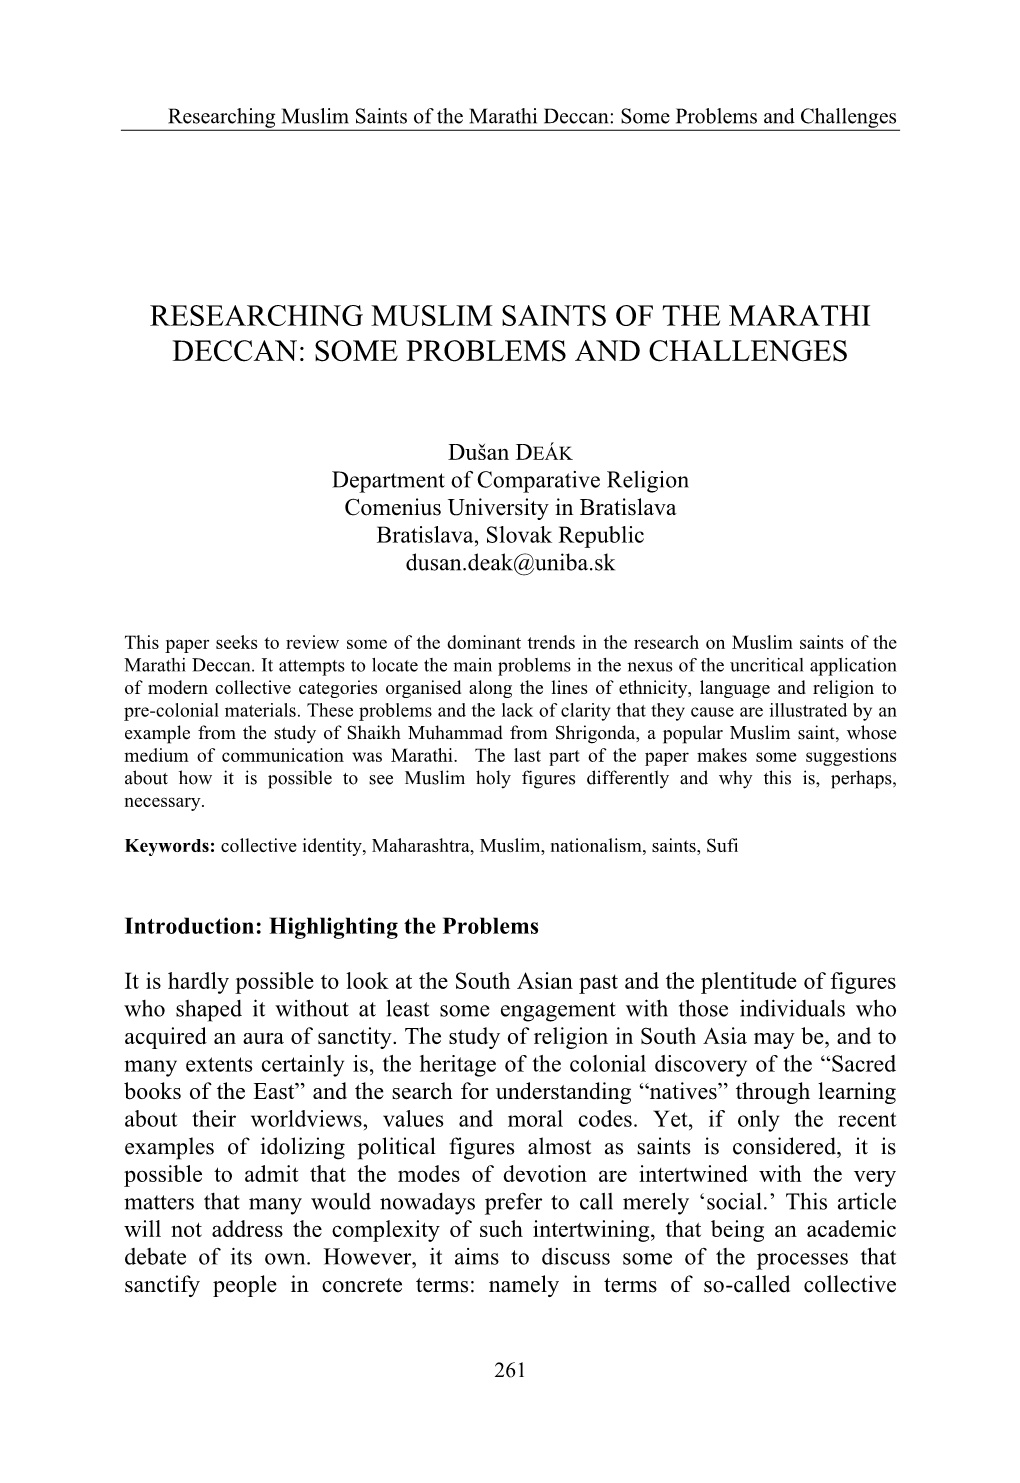 Researching Muslim Saints of the Marathi Deccan: Some Problems and Challenges